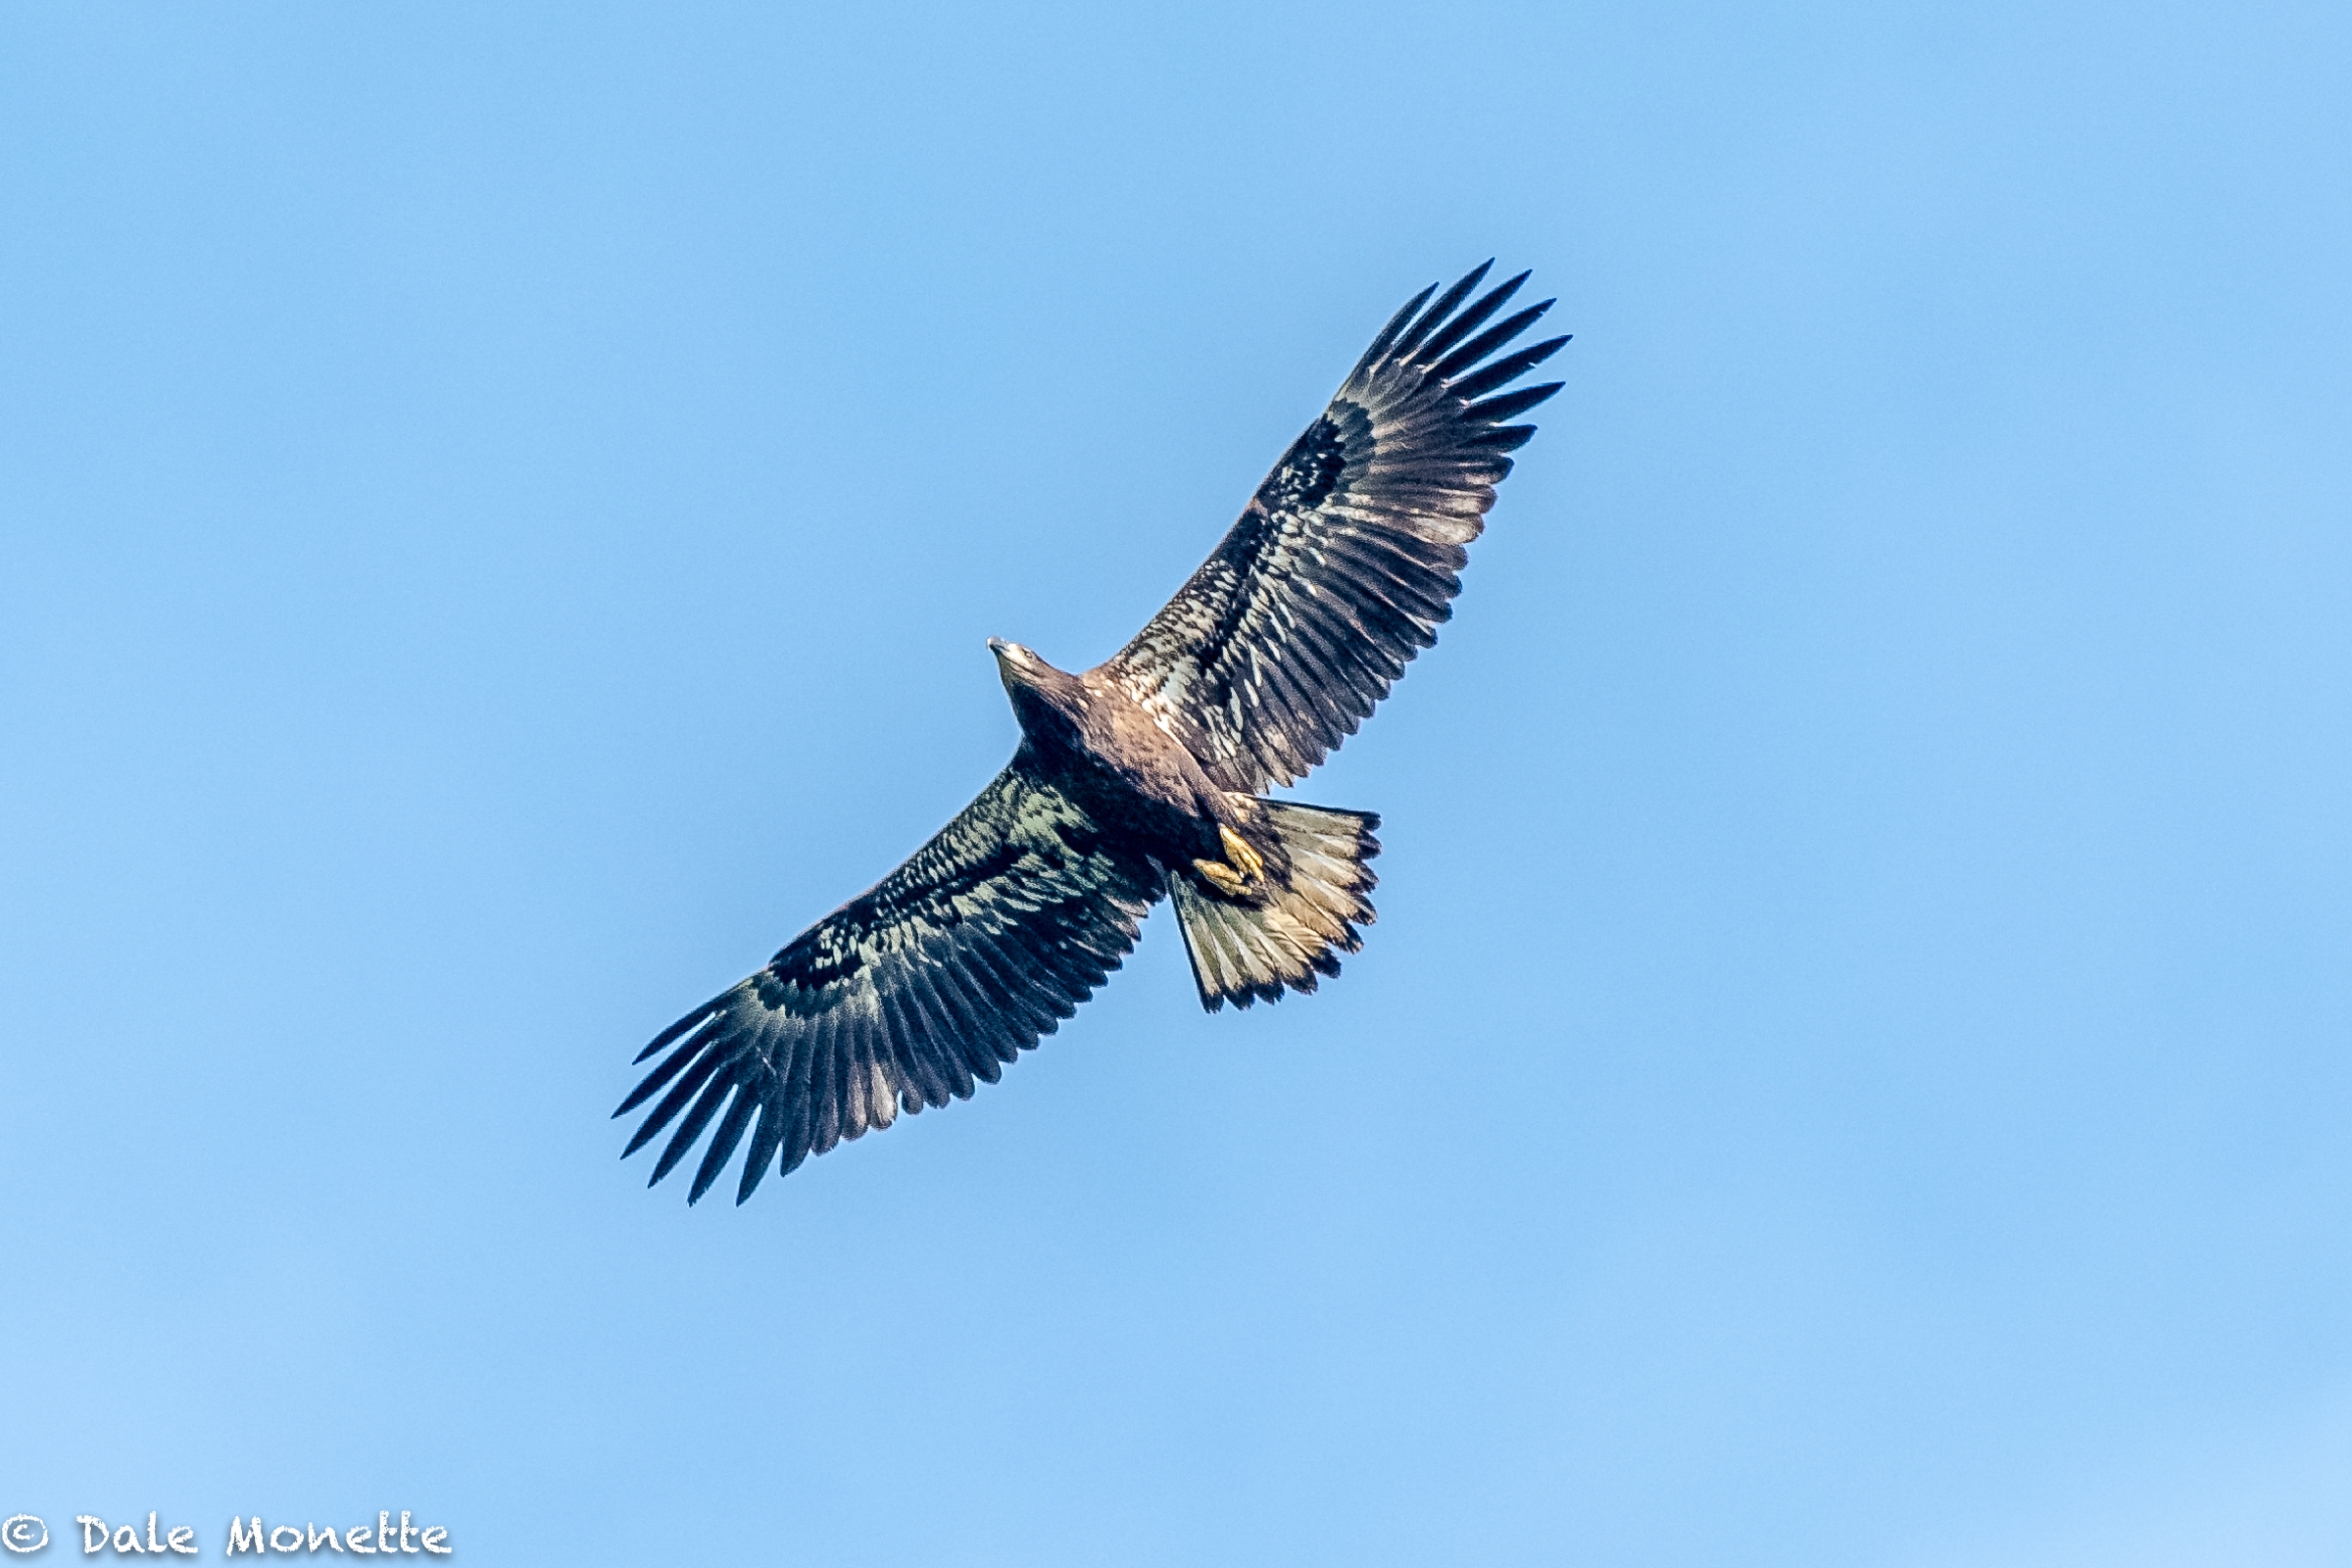   This juvenile bald eagle was soaring over Hunts Farm on RT 202 in Orange this morning about 8 AM……. Not far from the Quabbin and Lake Rohunta. By looking at the white feathers and green beak, you can tell this eagle is only about 5 to 6 months old.